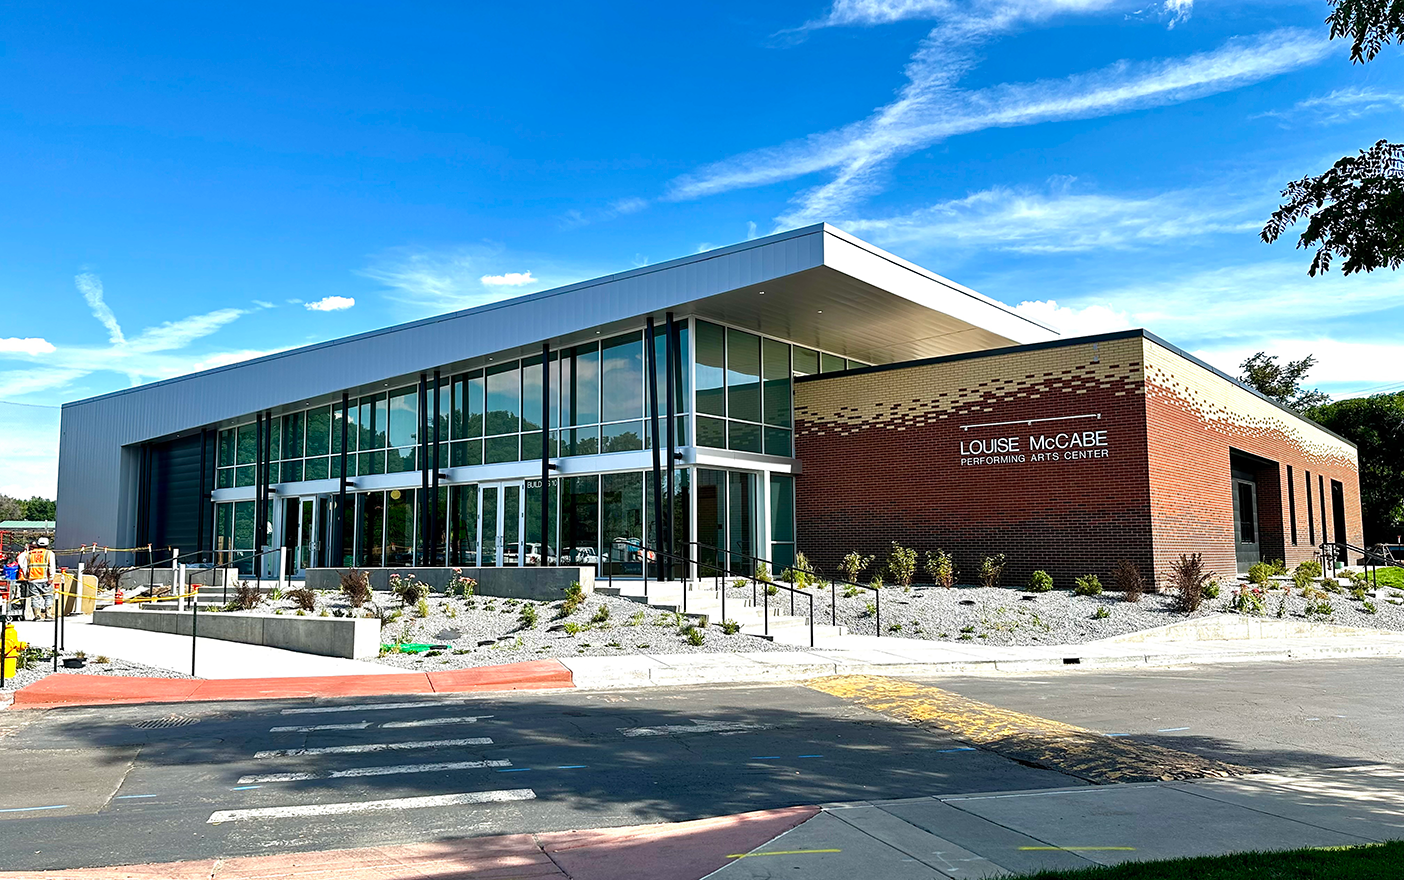 Exterior view of the Louise McCabe Performing Arts Center.